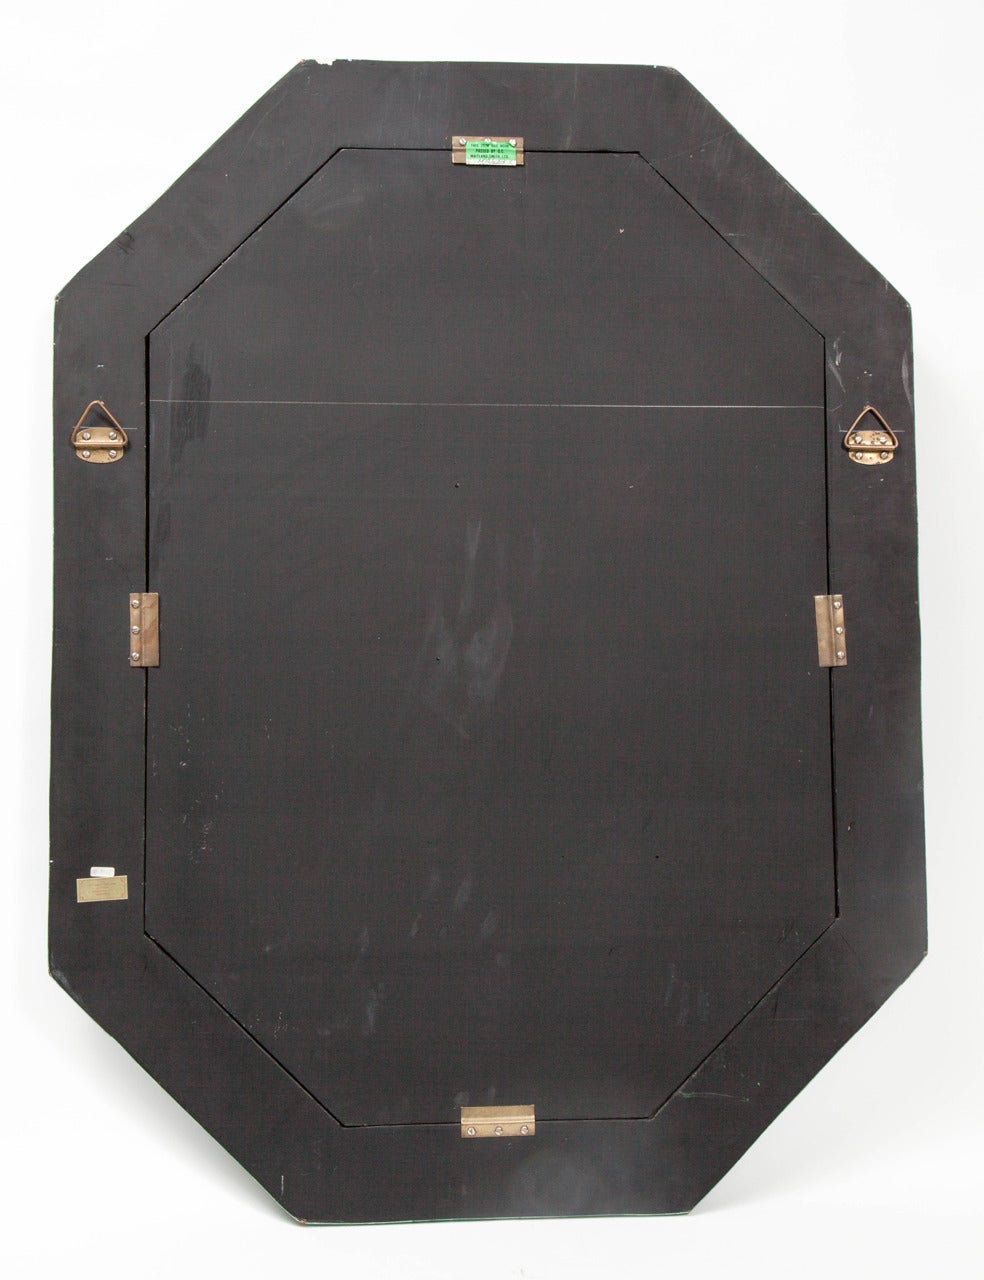 Tessellated Green Stone Octagonal Mirror with Brass Inlays Signed Maitland-Smith 2